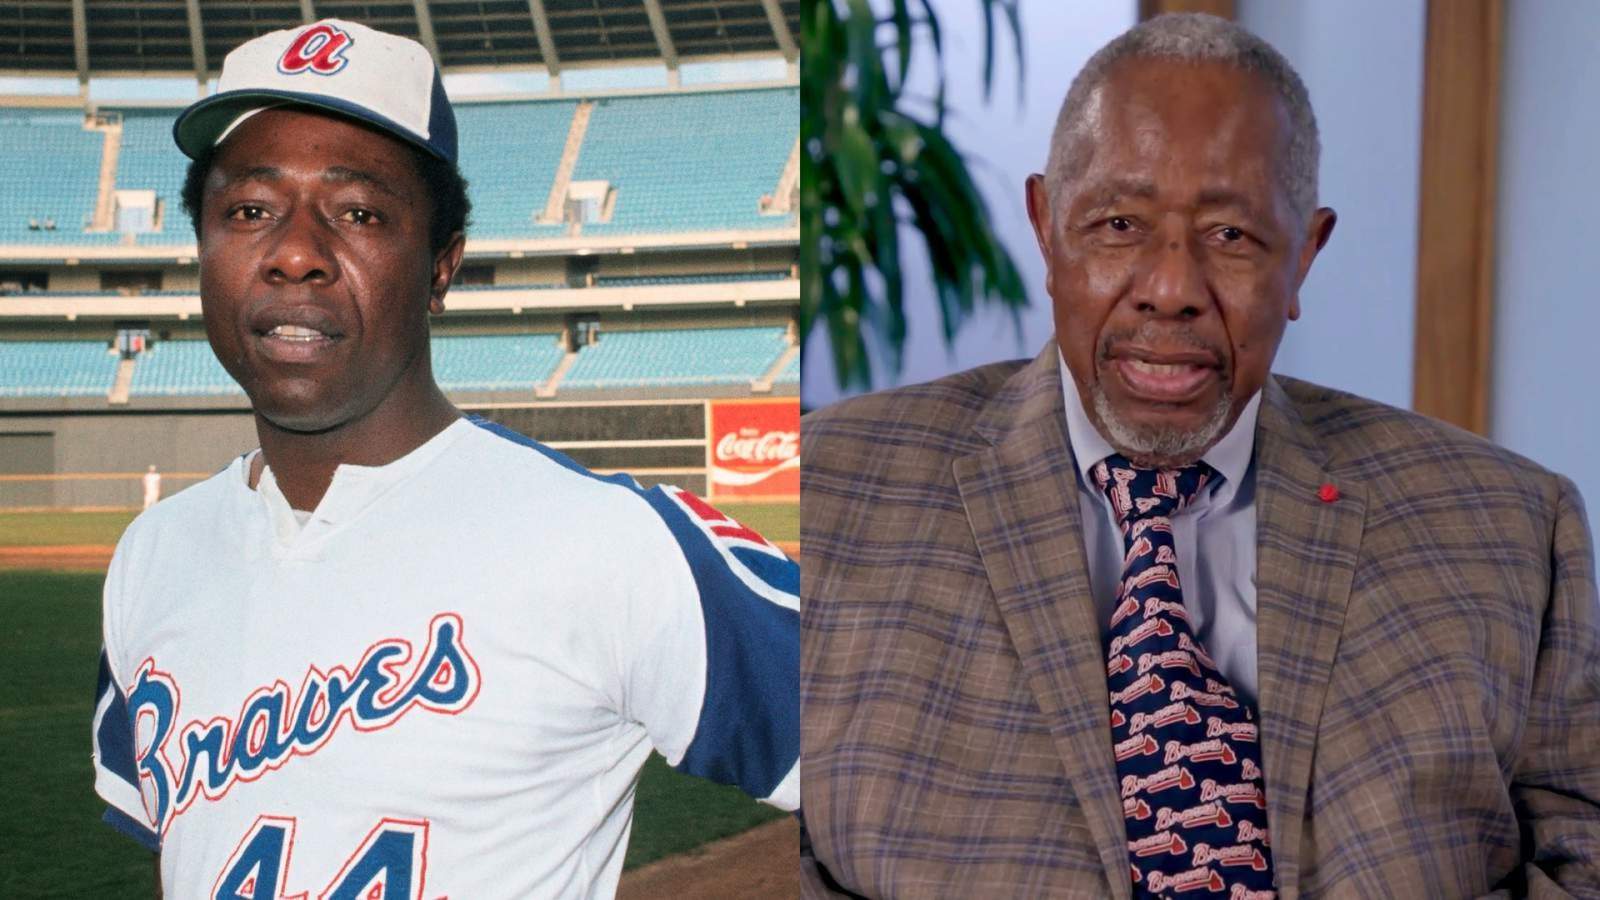 Baseball legend Hank Aaron has died at age 86, reports say